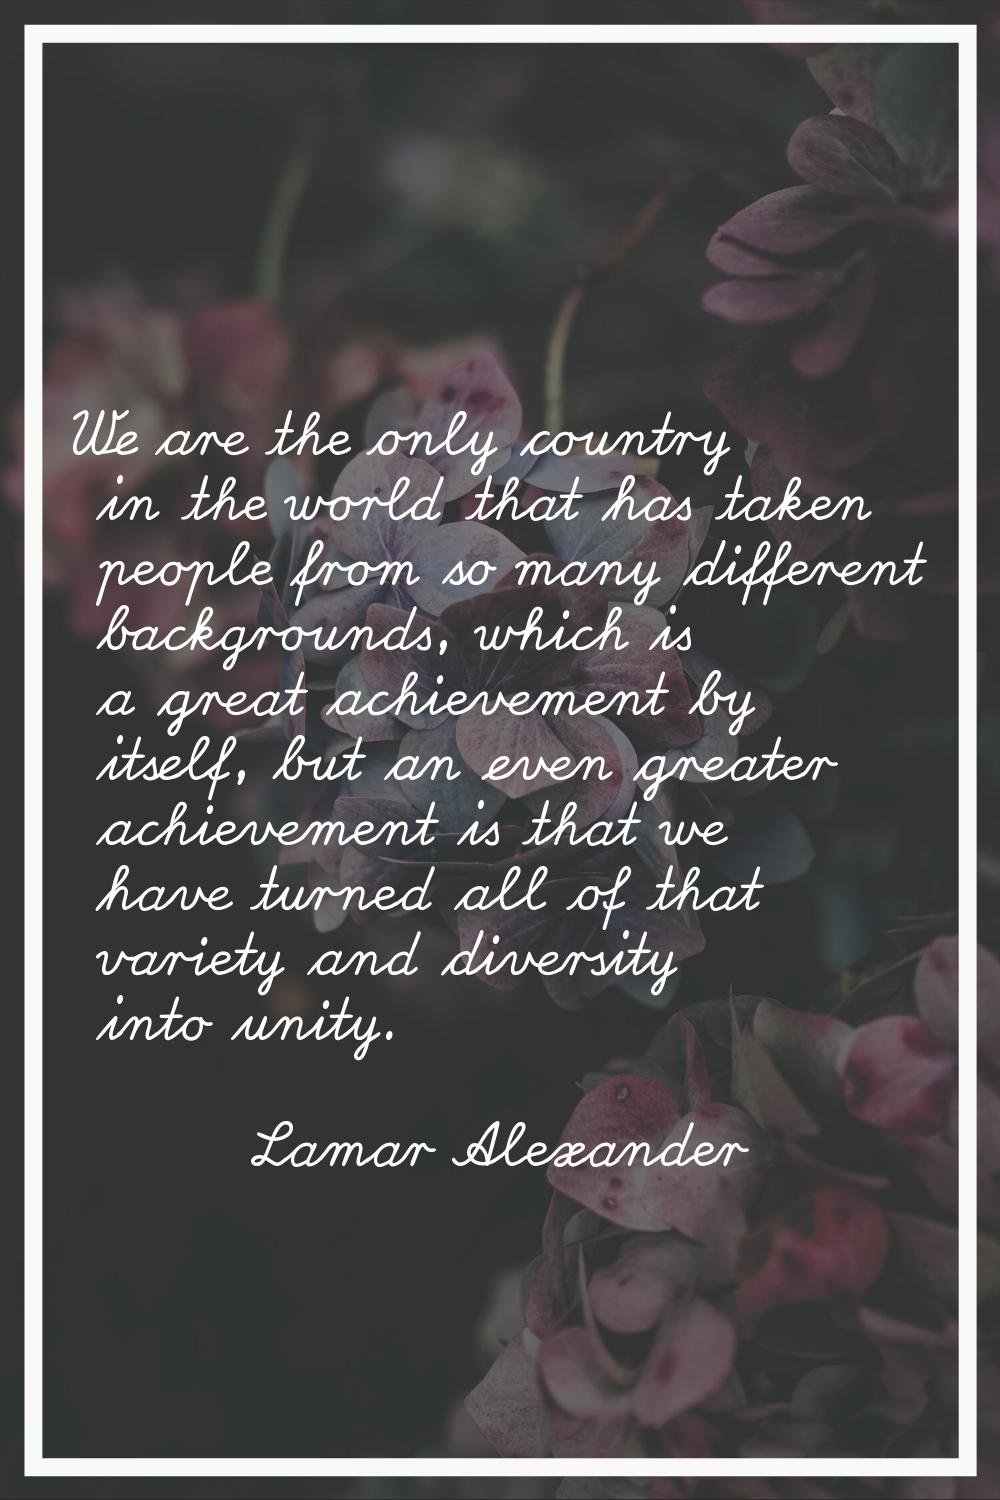 We are the only country in the world that has taken people from so many different backgrounds, whic